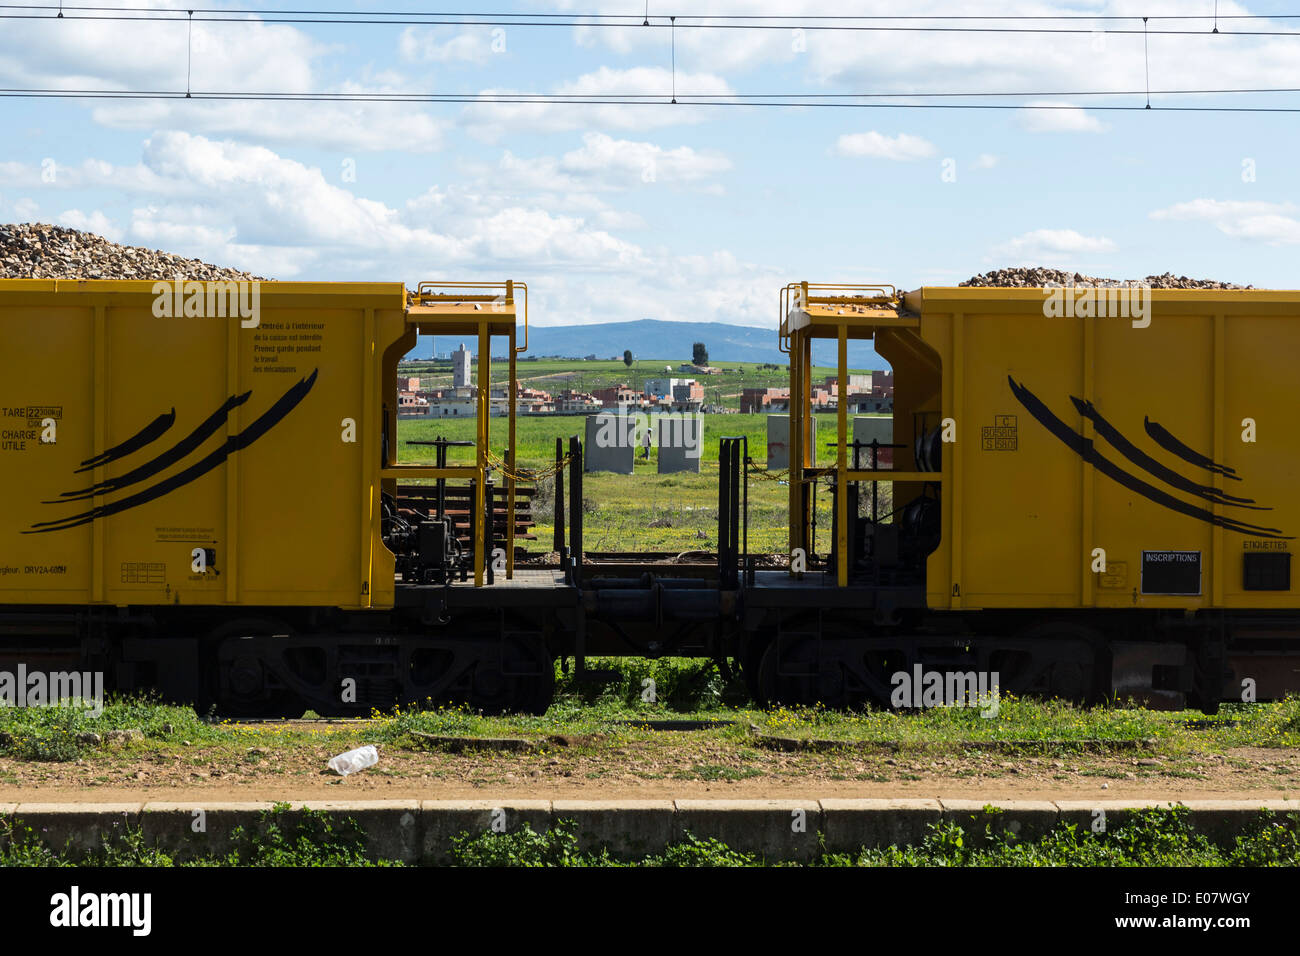 Yellow train in the countryside, Morocco Stock Photo